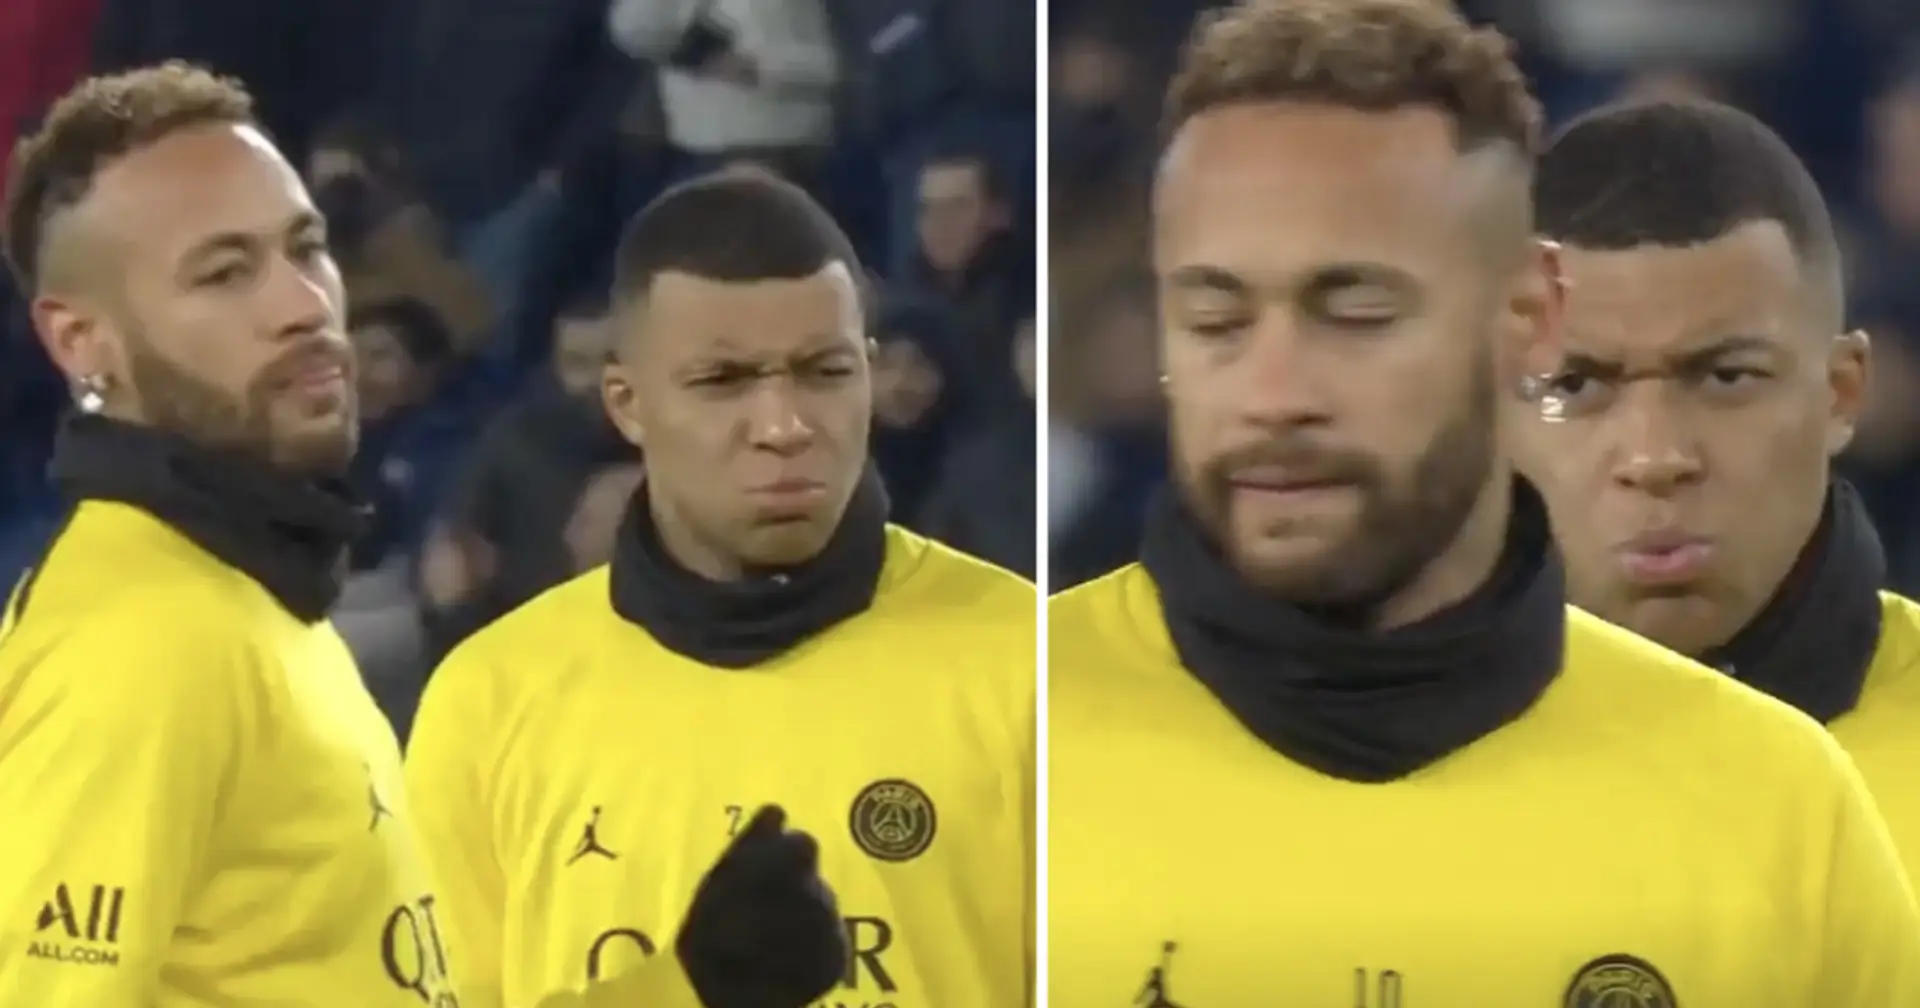 Neymar scores stunning free-kick during PSG warmup, Mbappe's hilarious reaction spotted